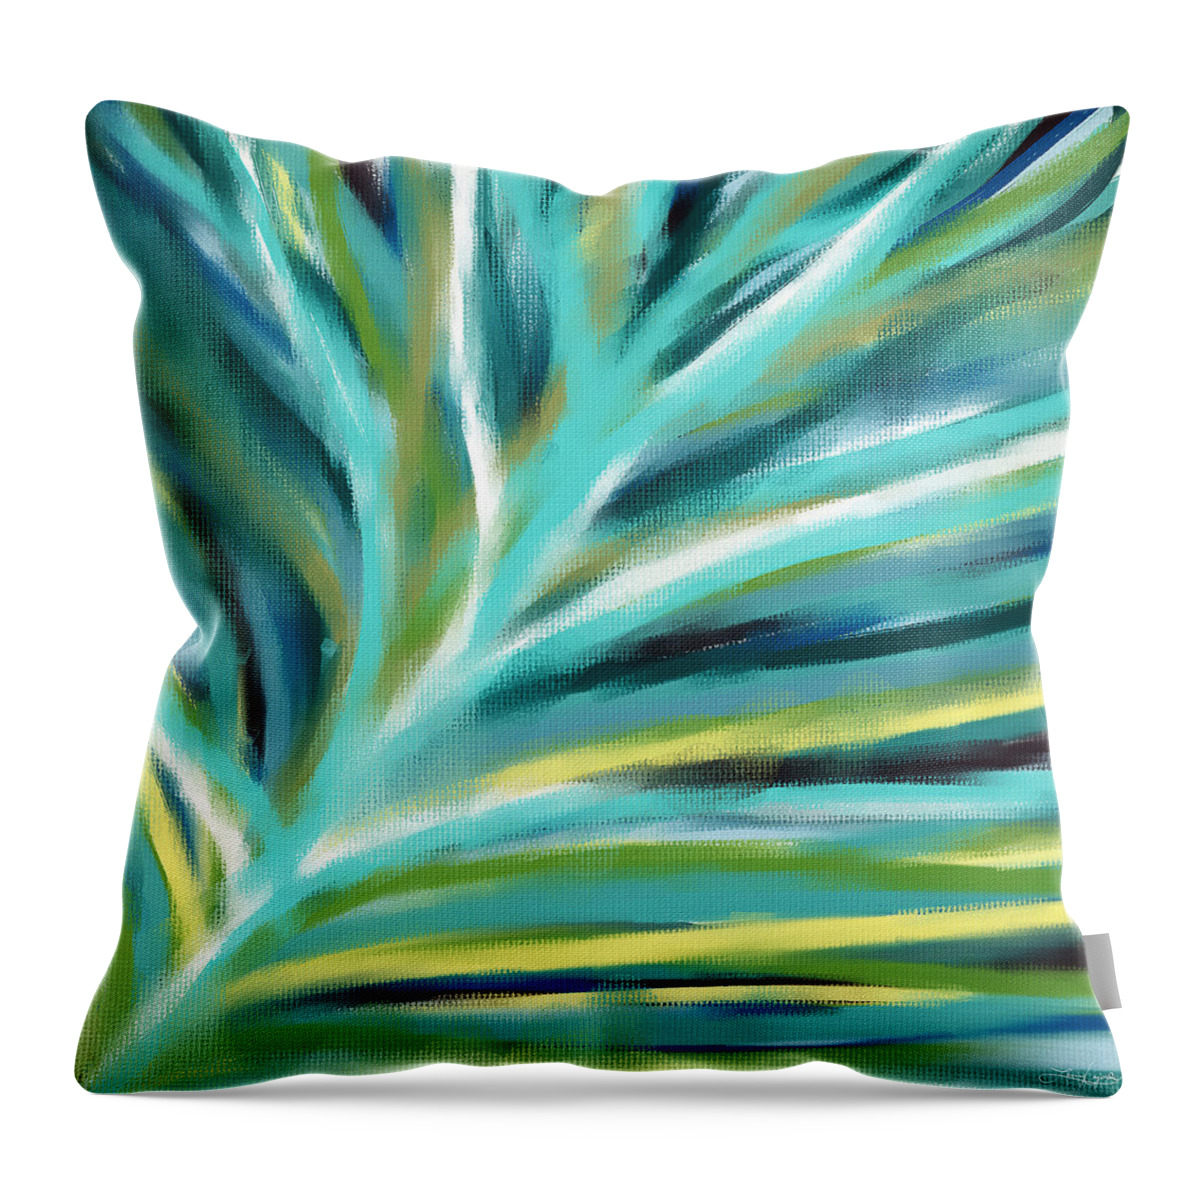 Turquoise Throw Pillow featuring the painting Funky Shades by Lourry Legarde